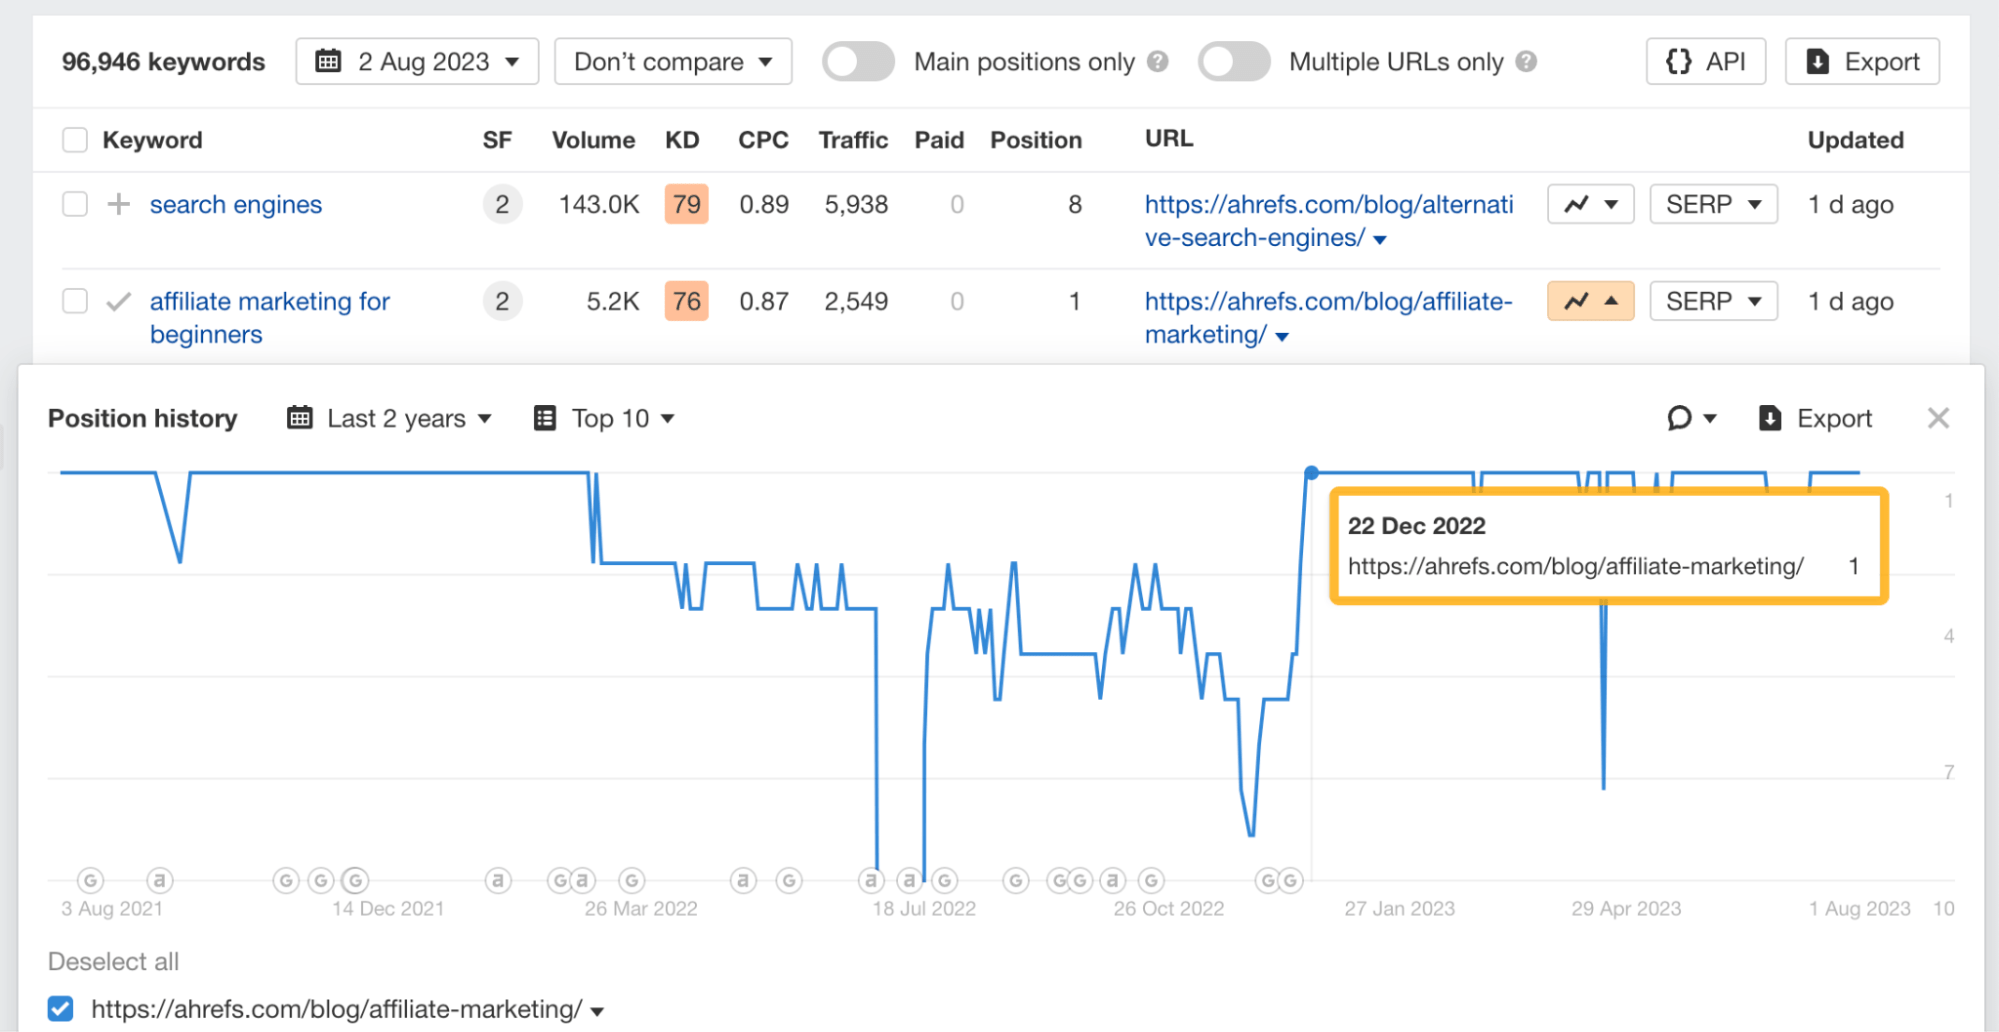 "Position history" chart for "affiliate marketing for beginners" in Organic keywords report, via Ahrefs' Site Explorer